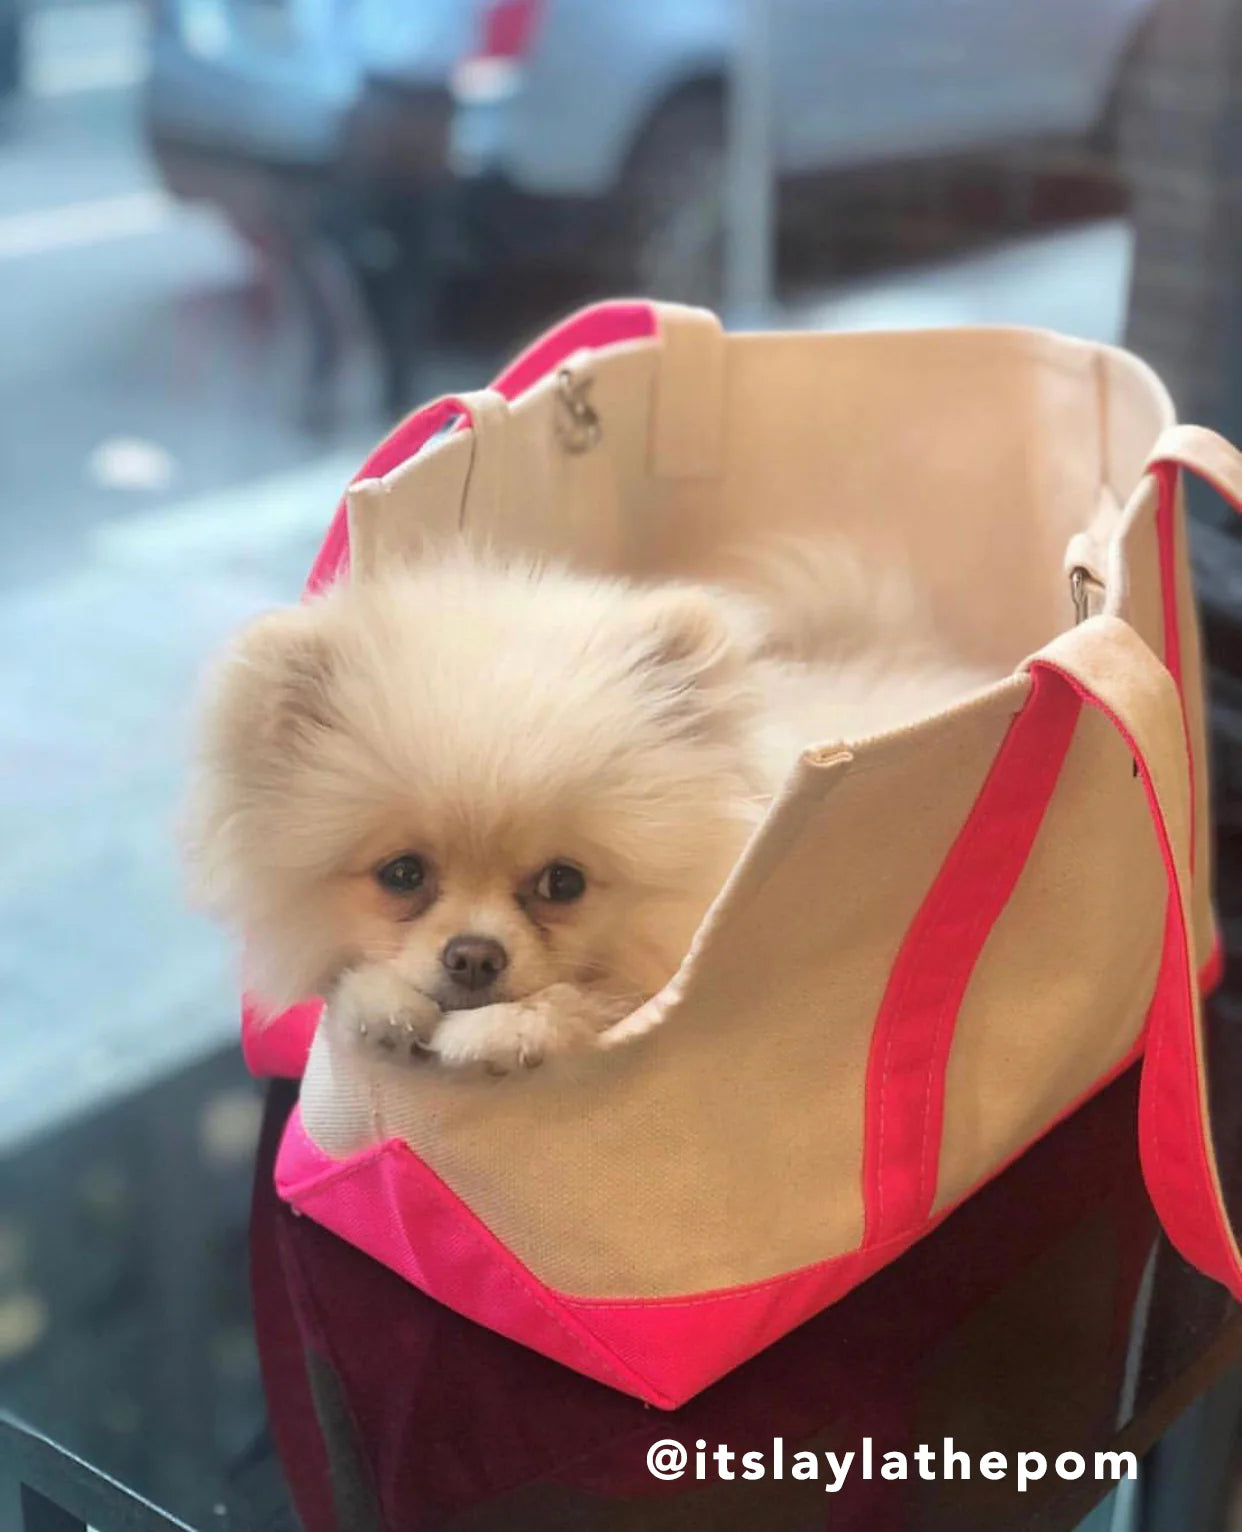 Spring/Summer - Canvas Tote - Open Dog Bag - 5 Color Options